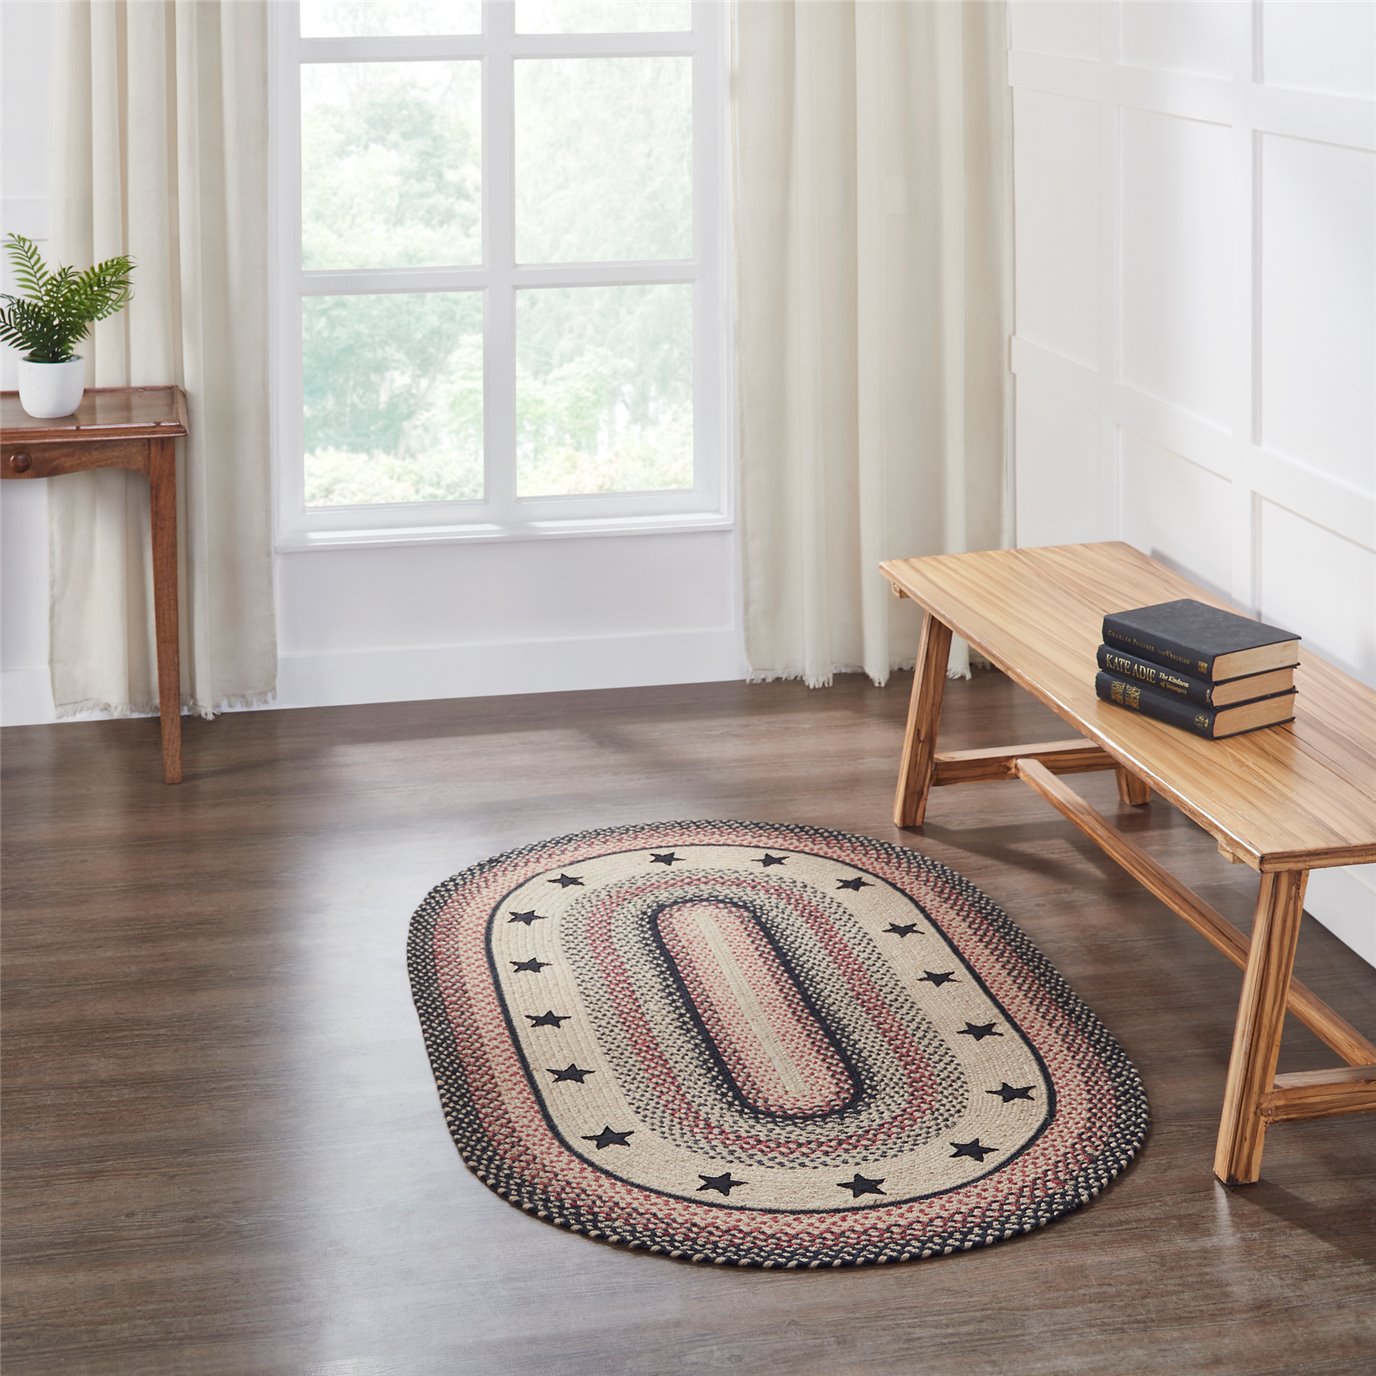 Colonial Star Jute Rug Oval w/ Pad 36x60 by Mayflower Market - VHC